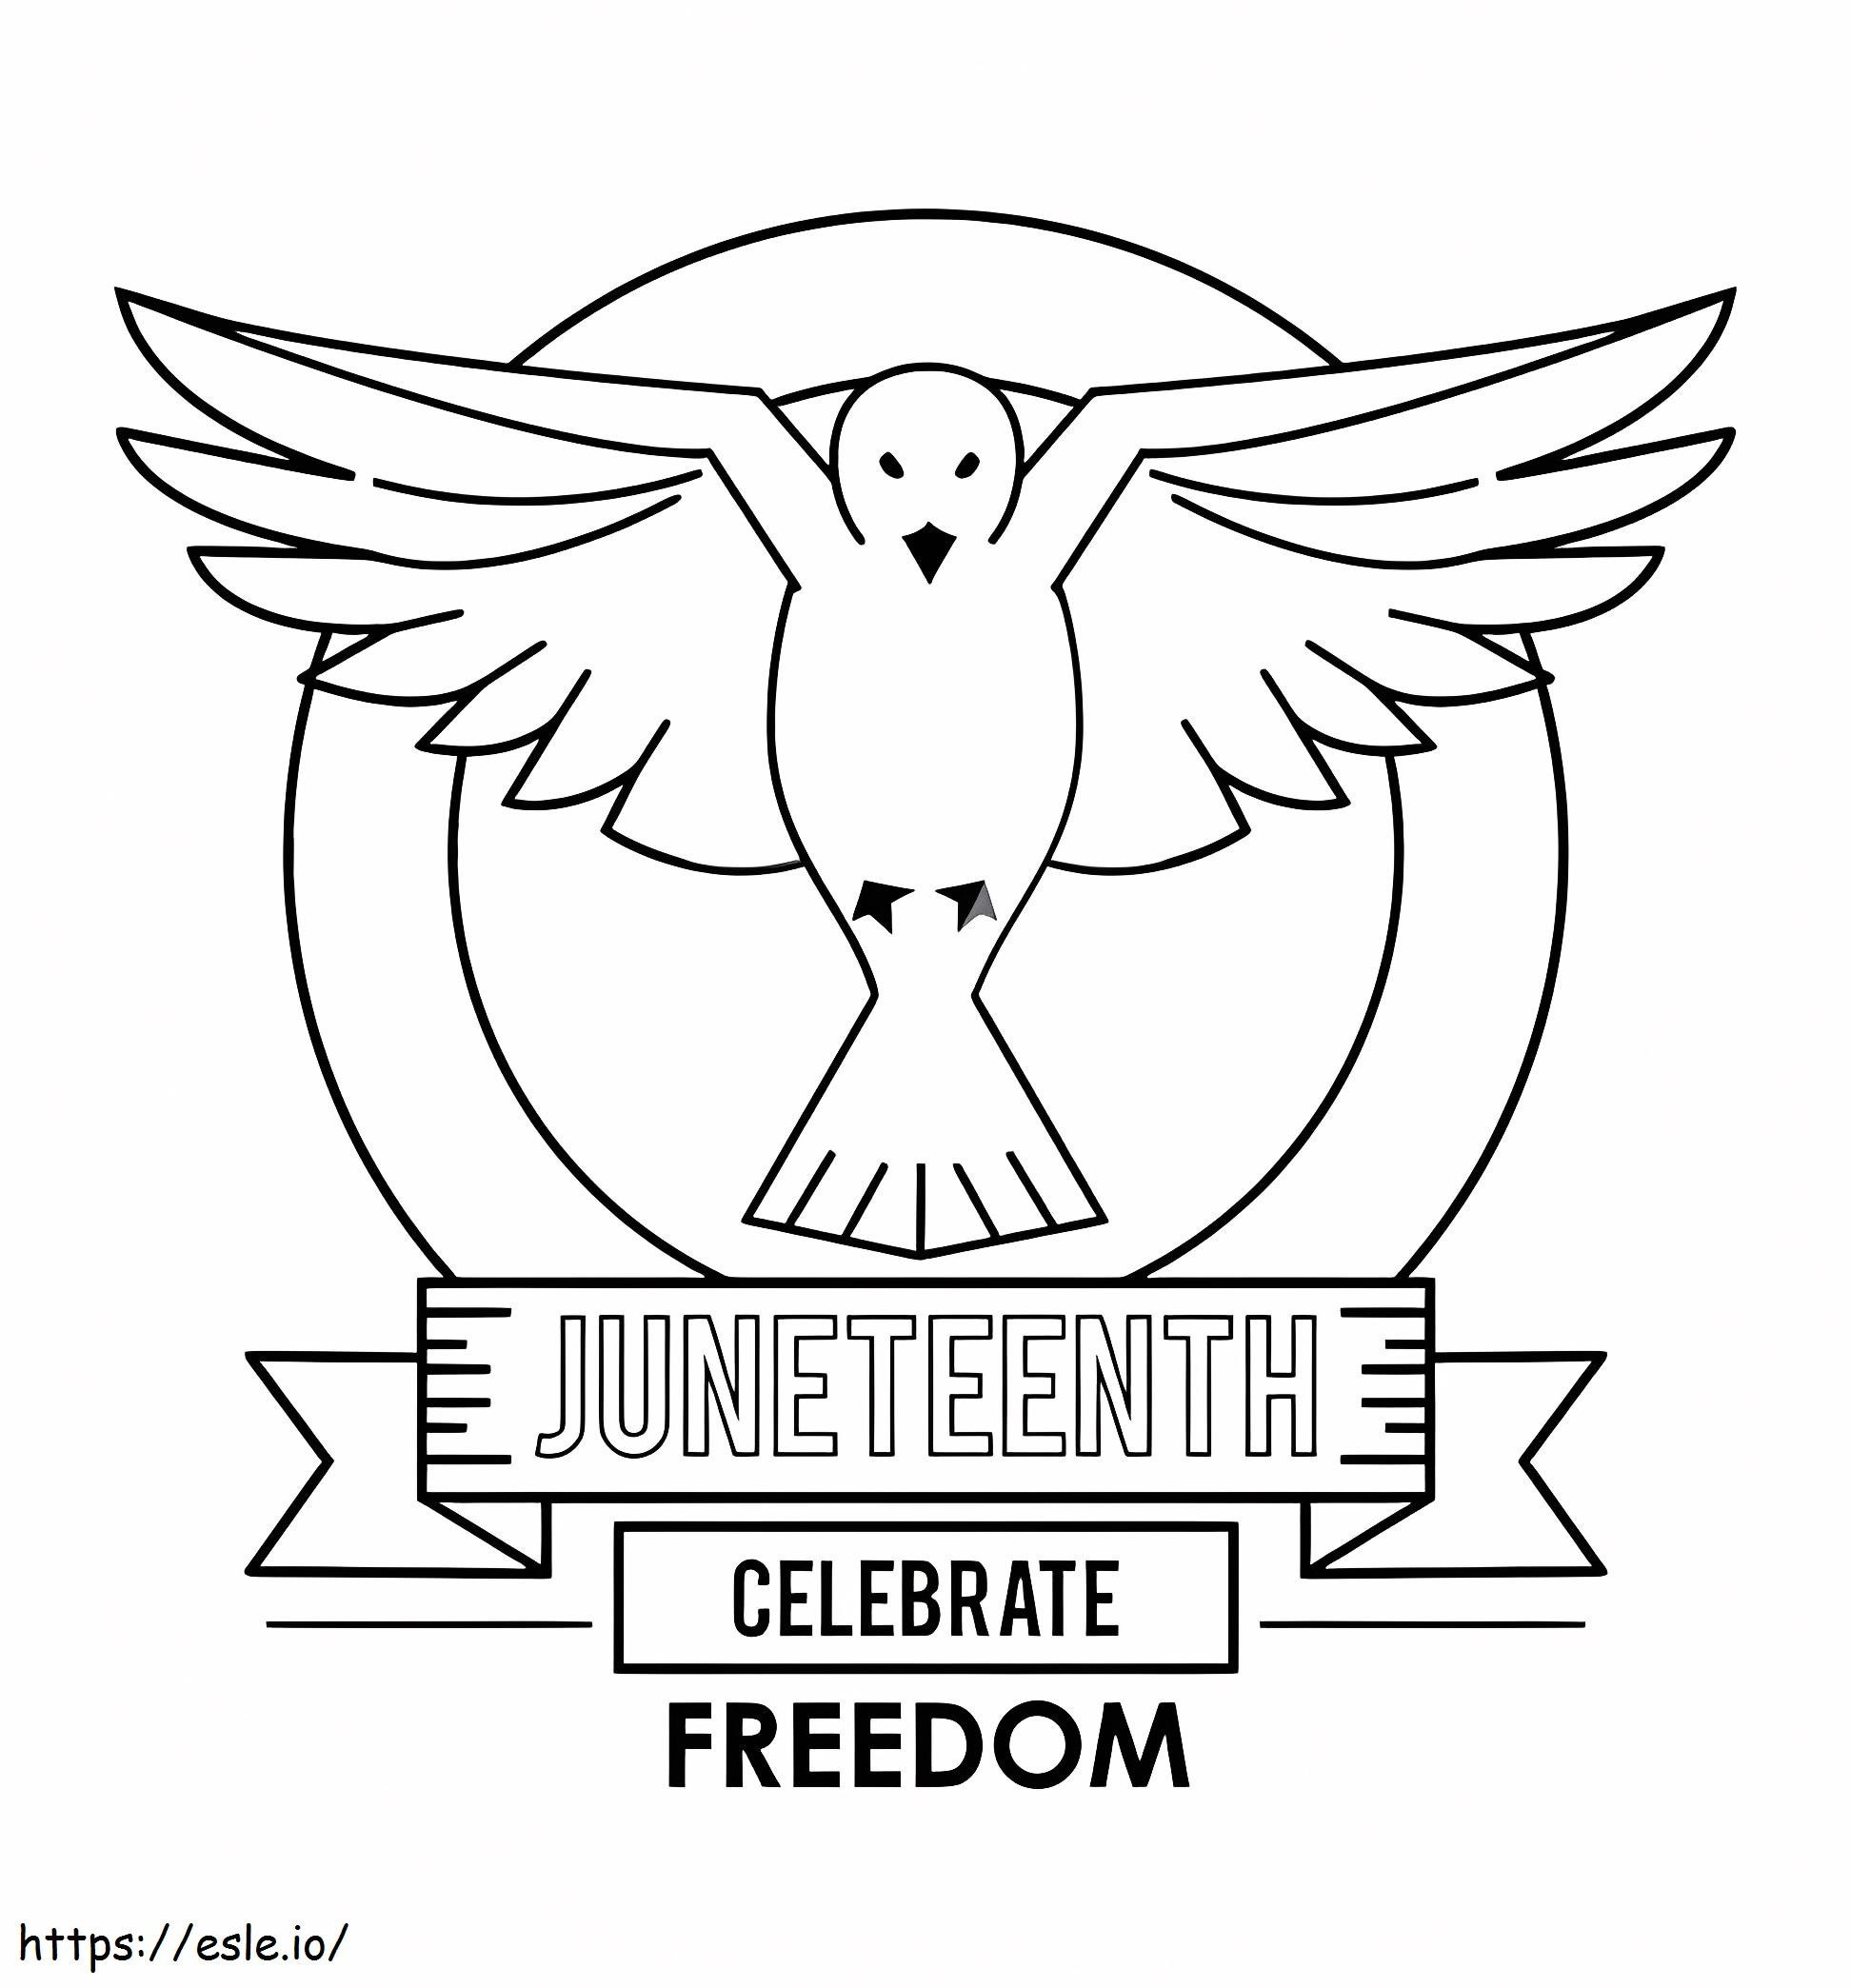 Juneteenth 3 coloring page